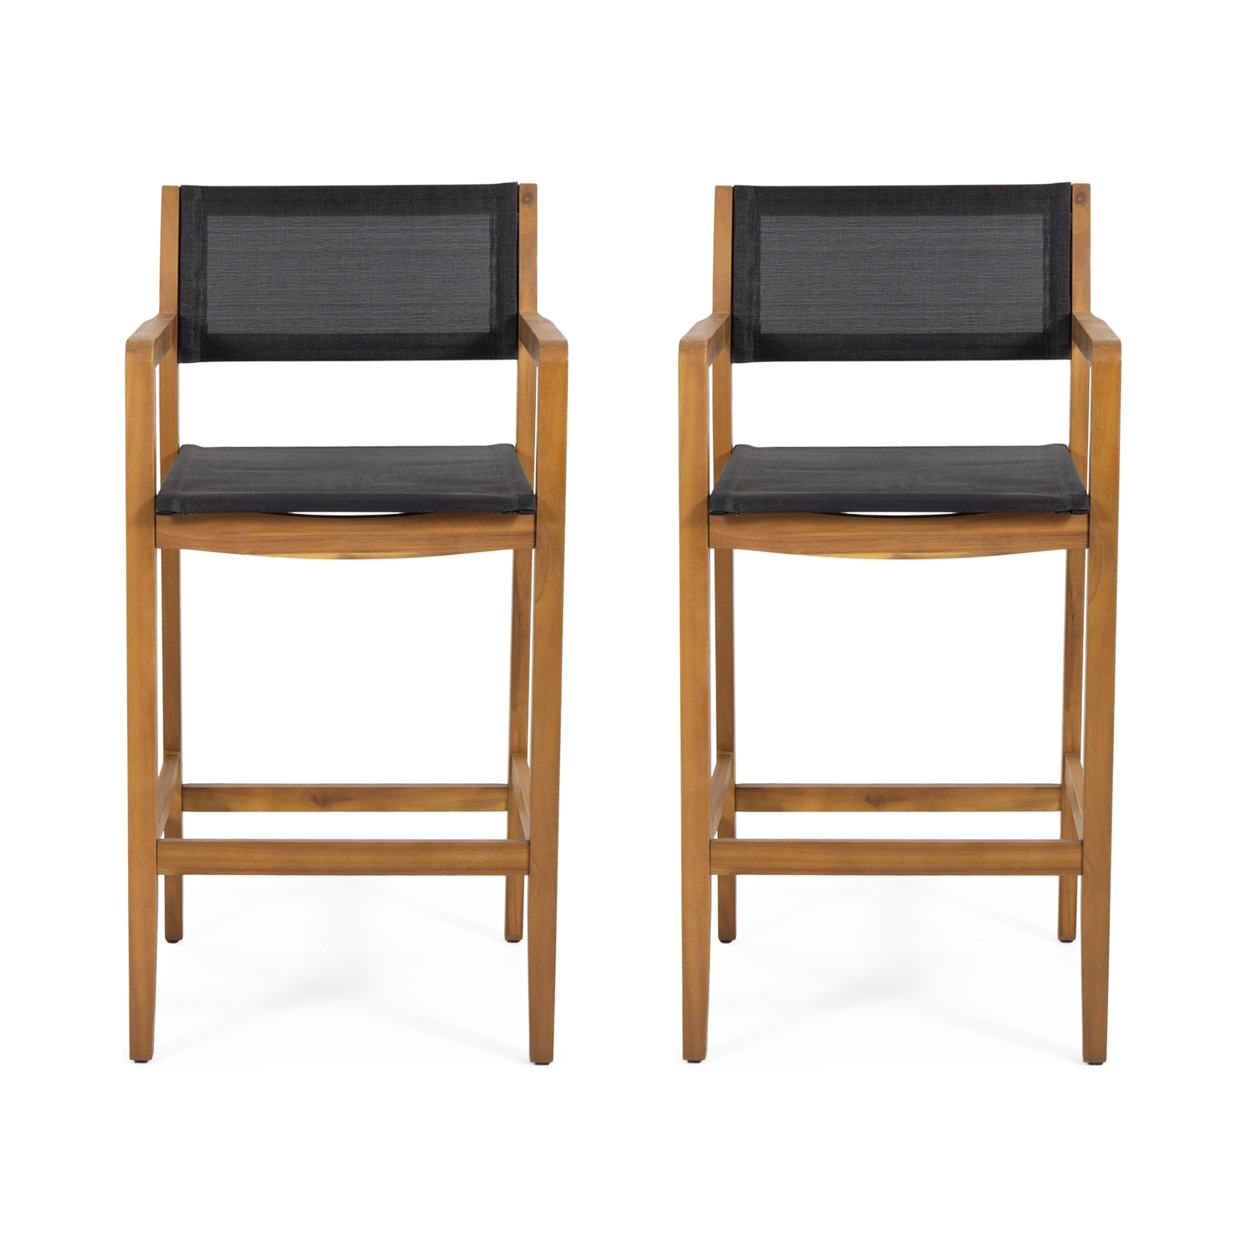 Daiquan Outdoor Acacia Wood Barstools With Outdoor Mesh (Set Of 2)